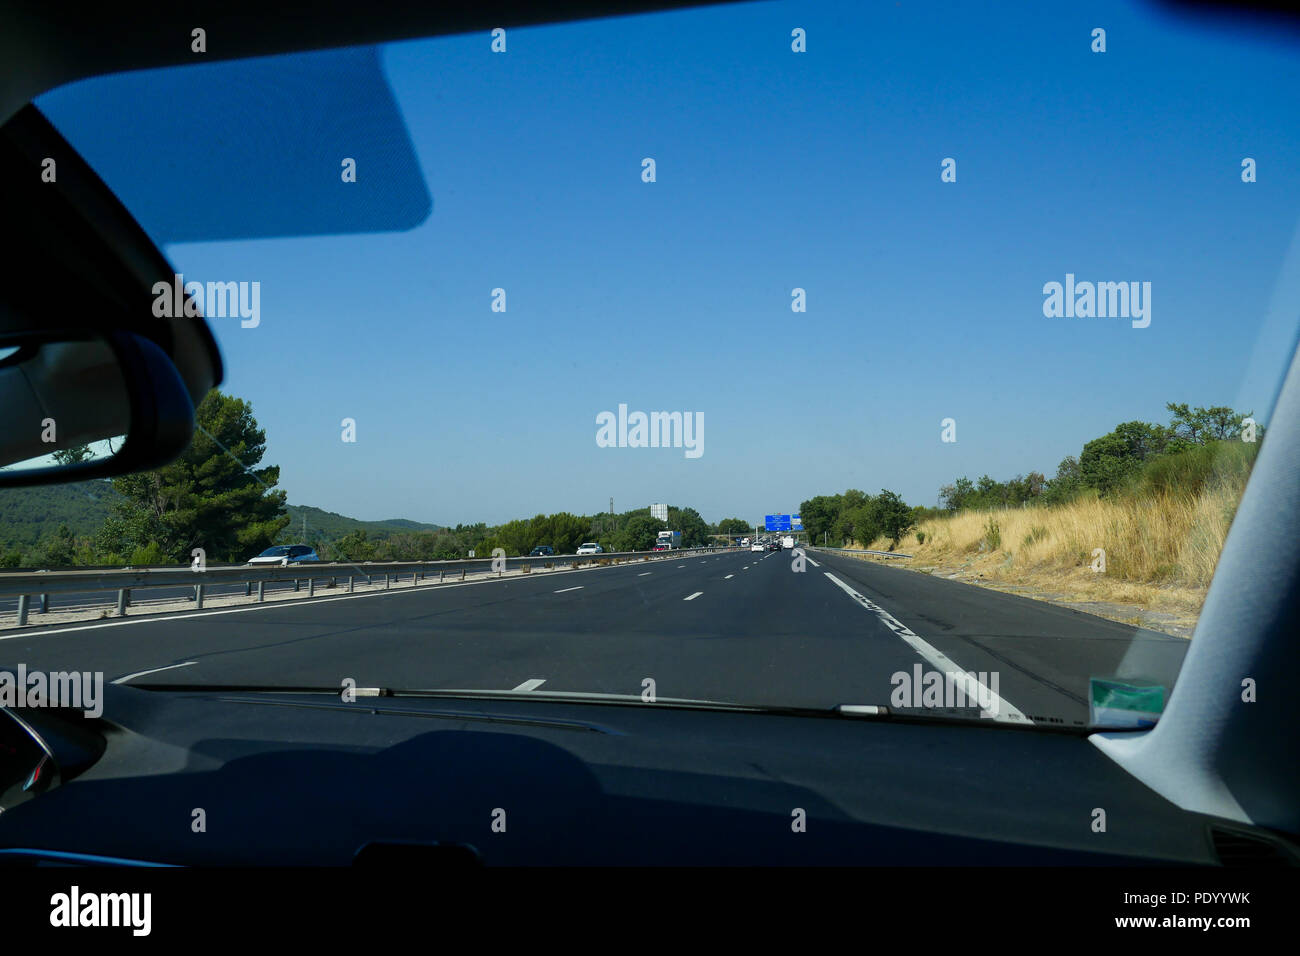 Driving on A7 highway - Autoroute du Soleil - illustration, Rhone Valley, France Stock Photo